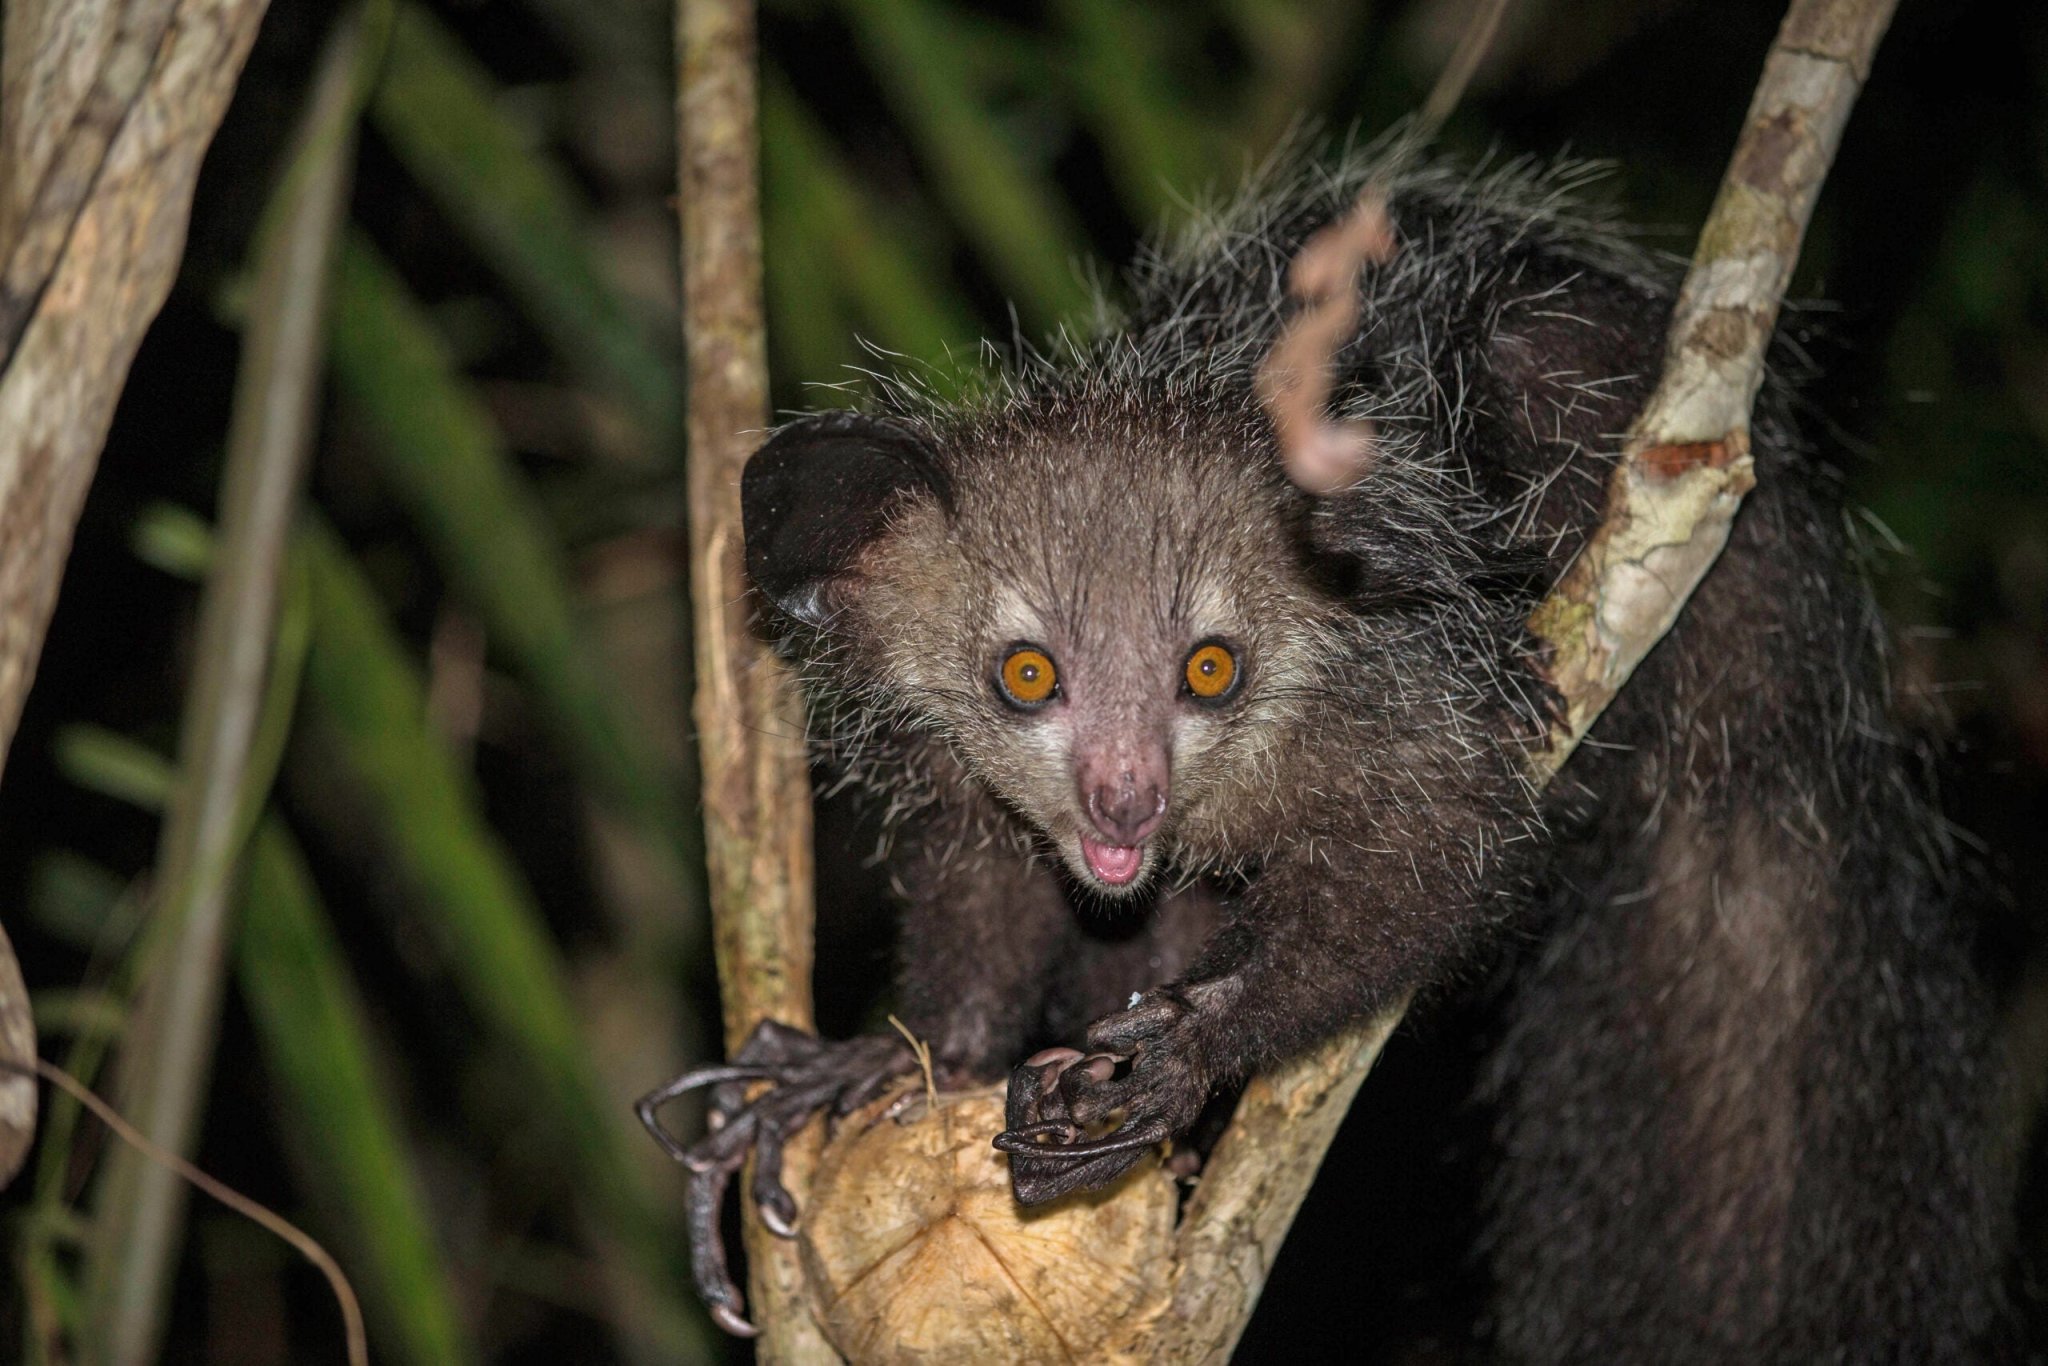 These long-fingered lemurs pick and eat their boogers, just like humans